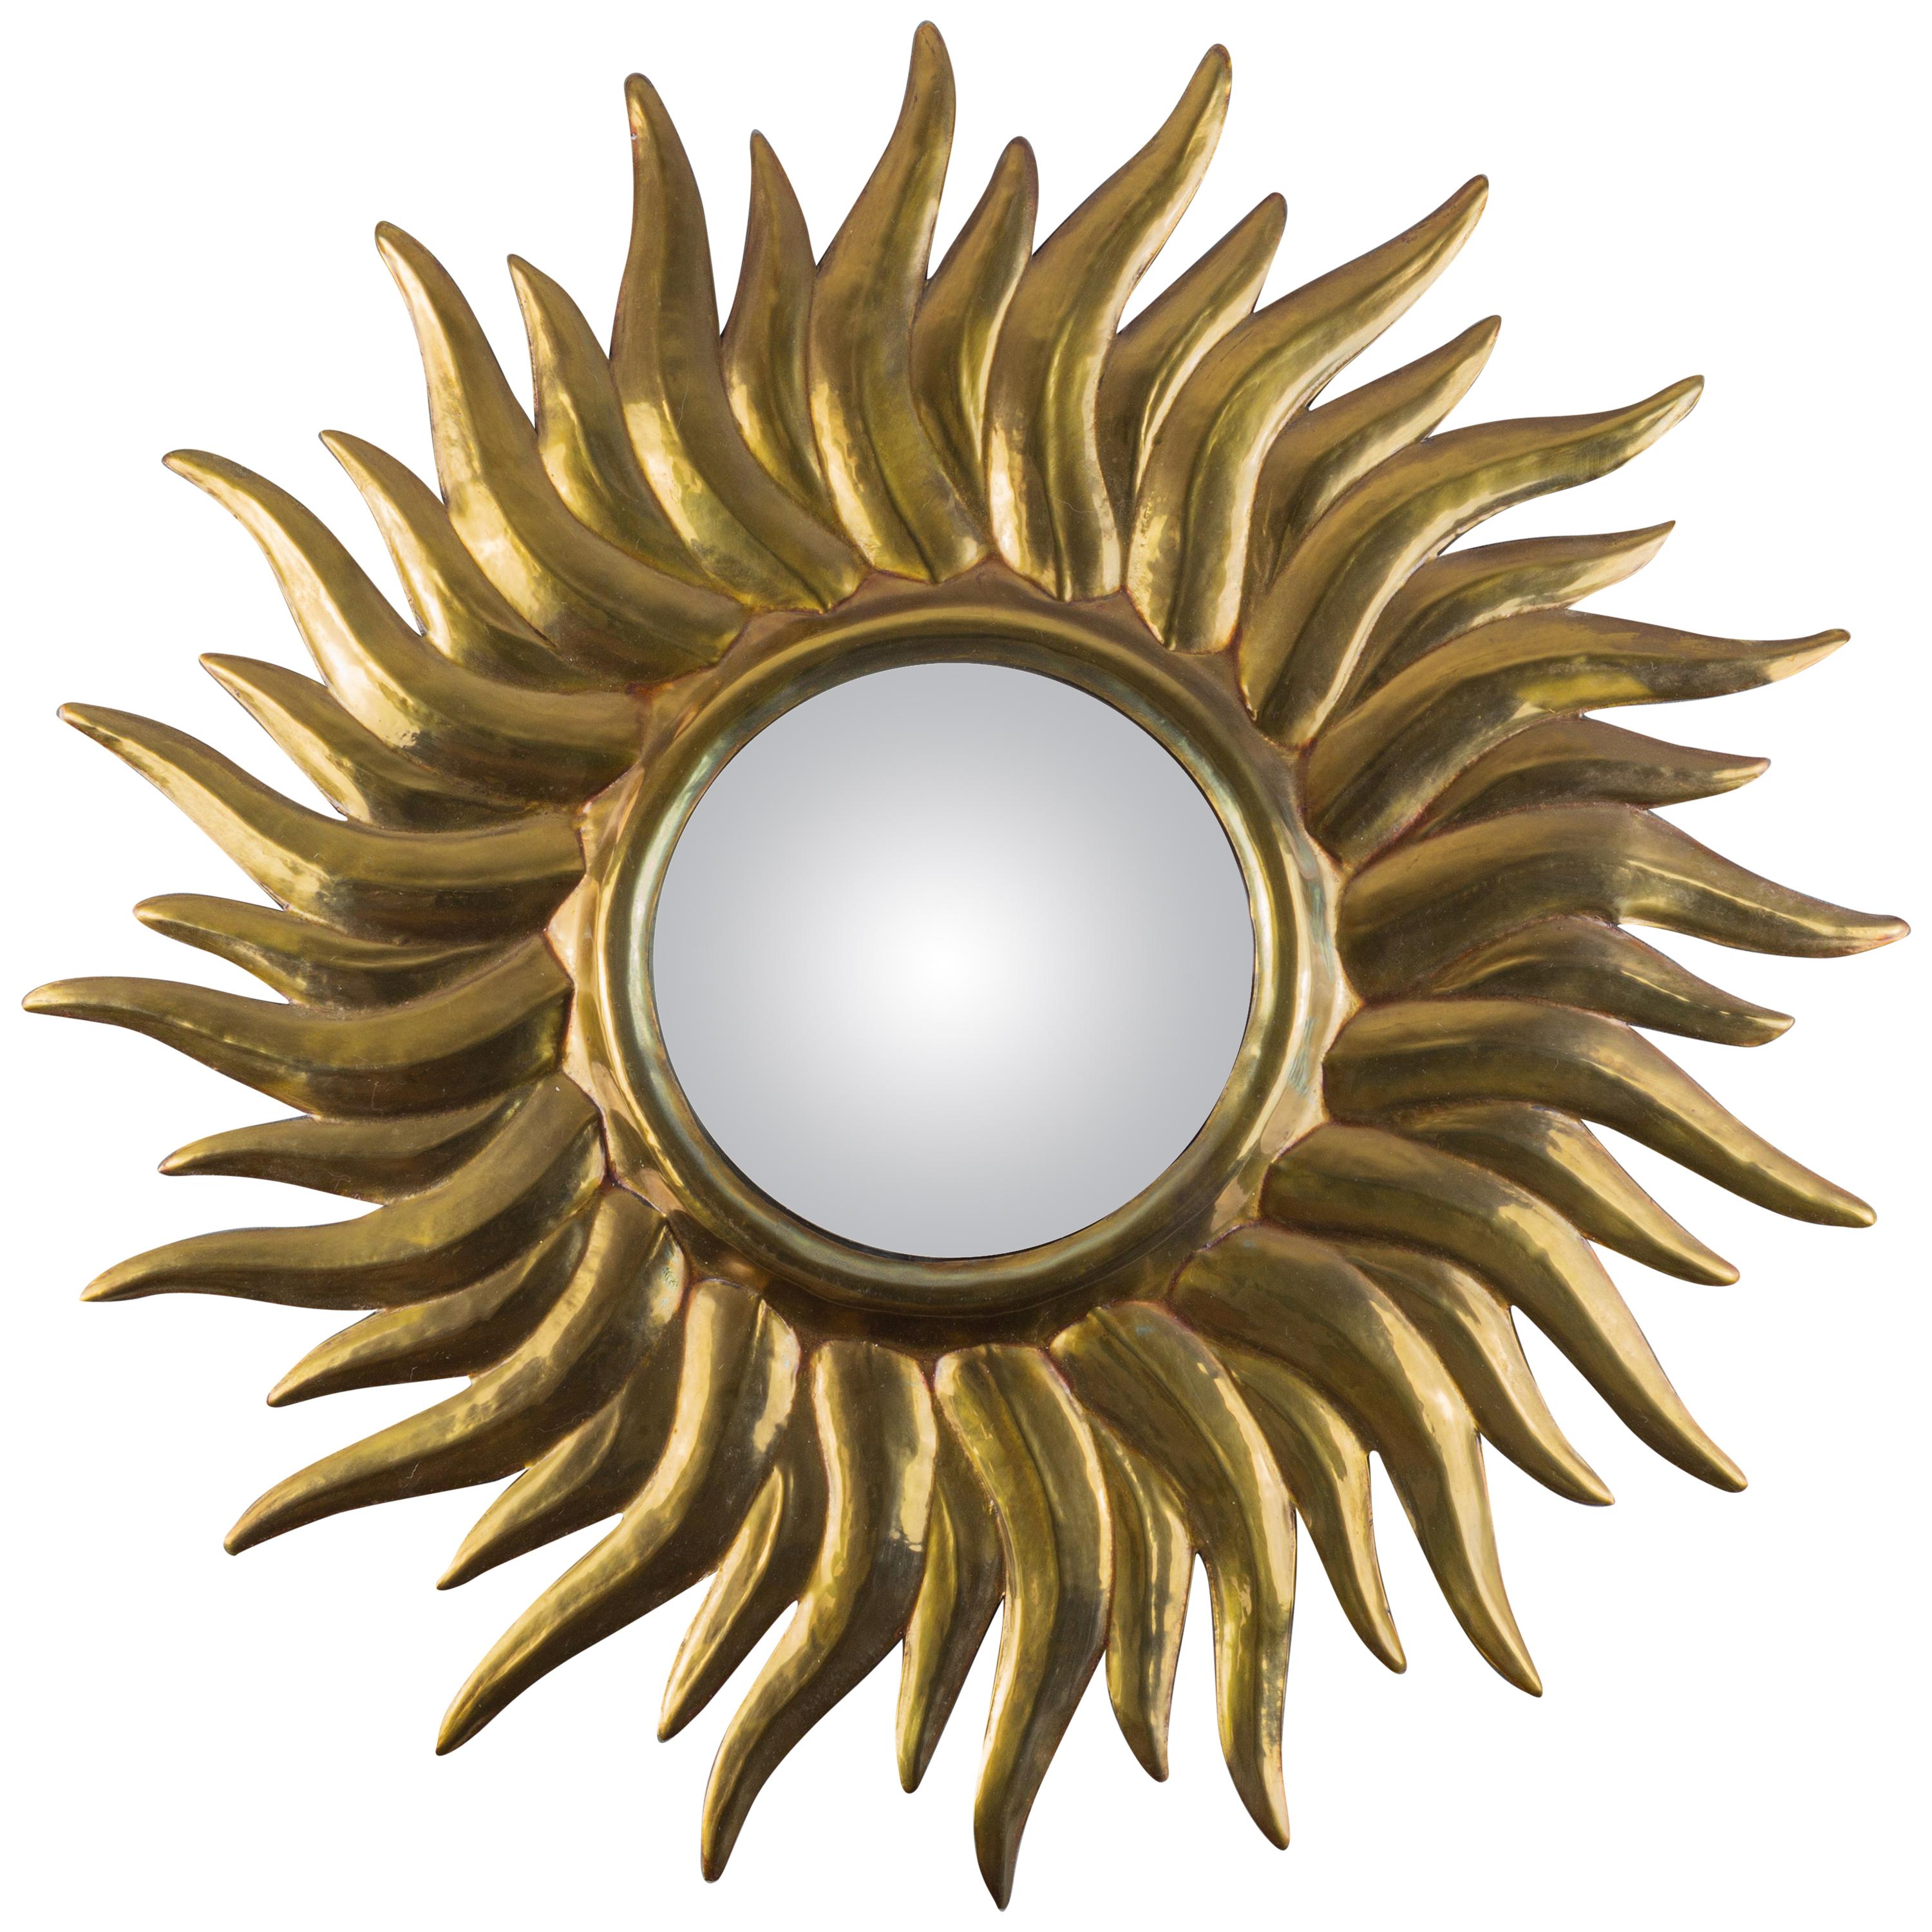 Antique French Sunburst Wall Mirror with Convex Mirror Glass, Late 19th Century For Sale